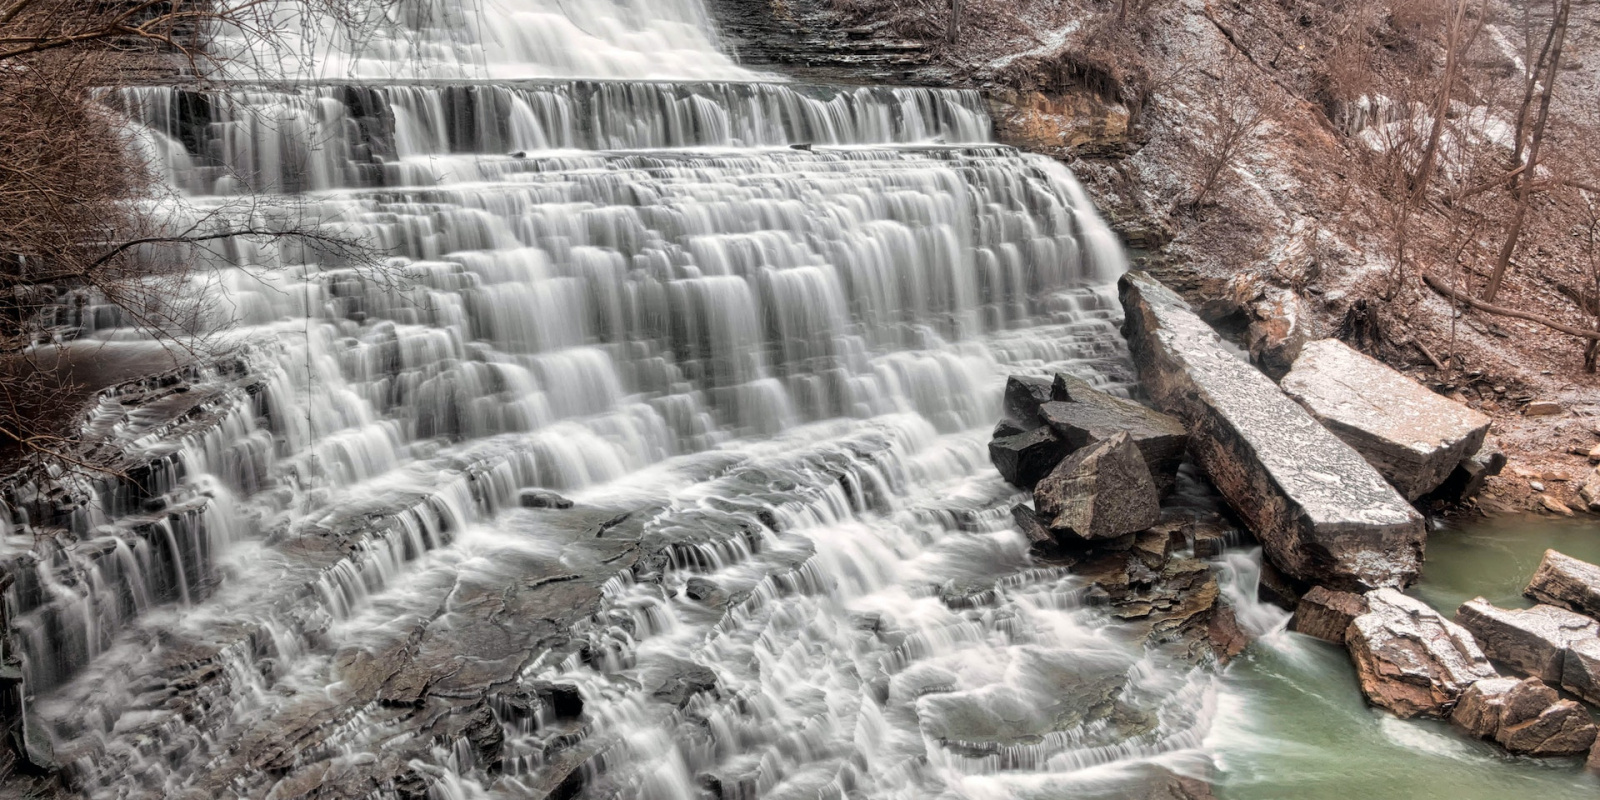 Photo: Waterfall in form of a wide cascade